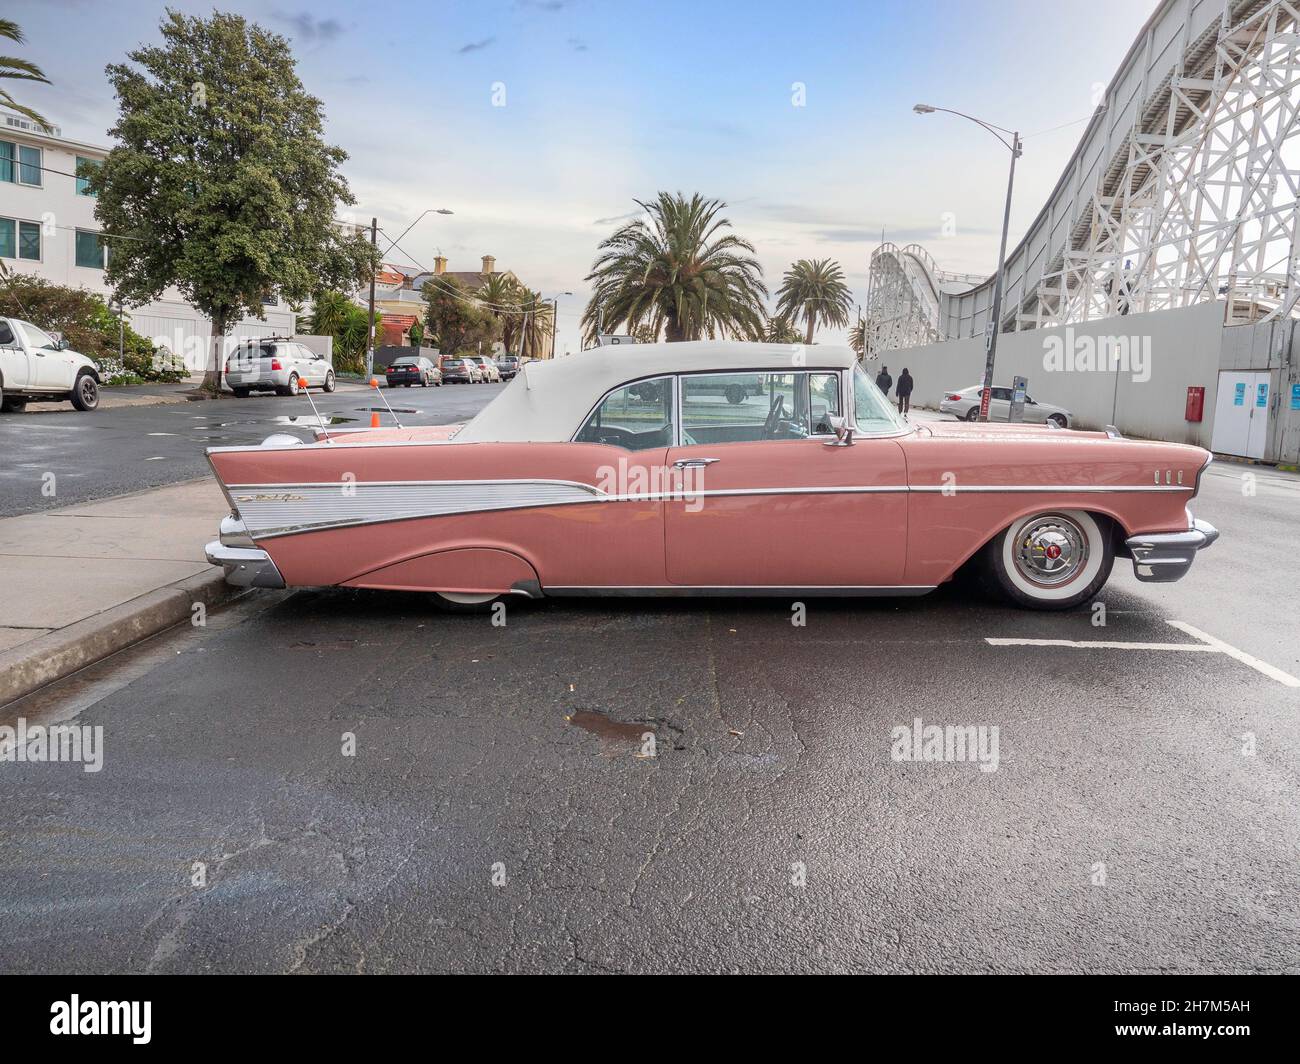 Side view of a Chevrolet Bel Air classic car at St Kilda car show. pale pink color. Melbourne Australia - September 2019. Stock Photo